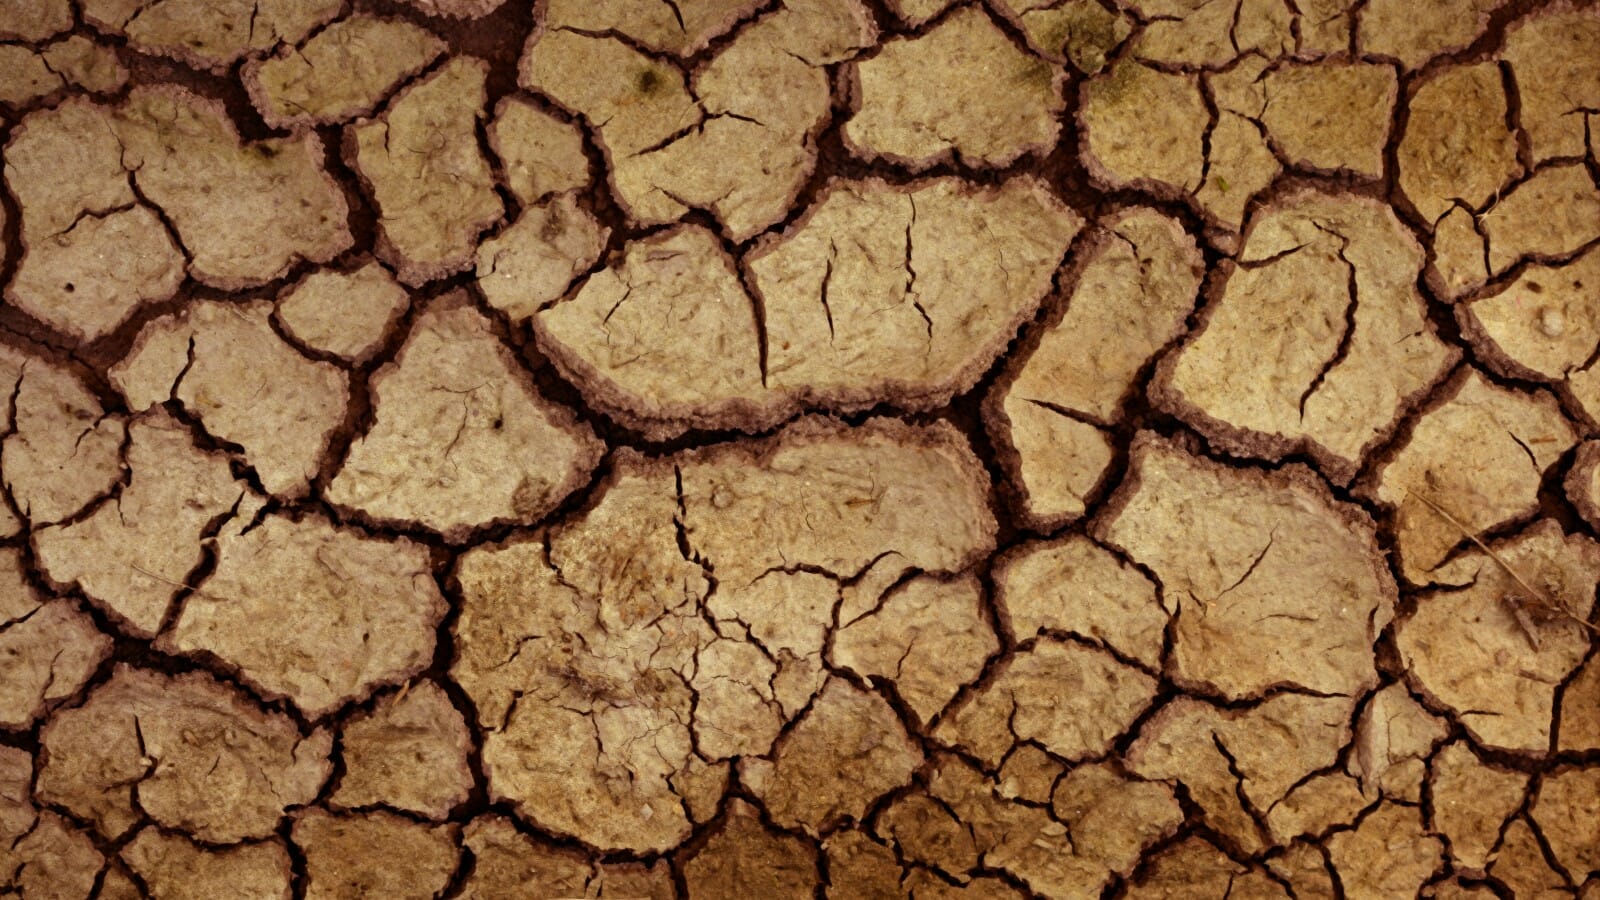 A close-up image showcasing the texture of dry red clay soil, characterized by its distinct reddish hue and cracked surface due to lack of moisture.